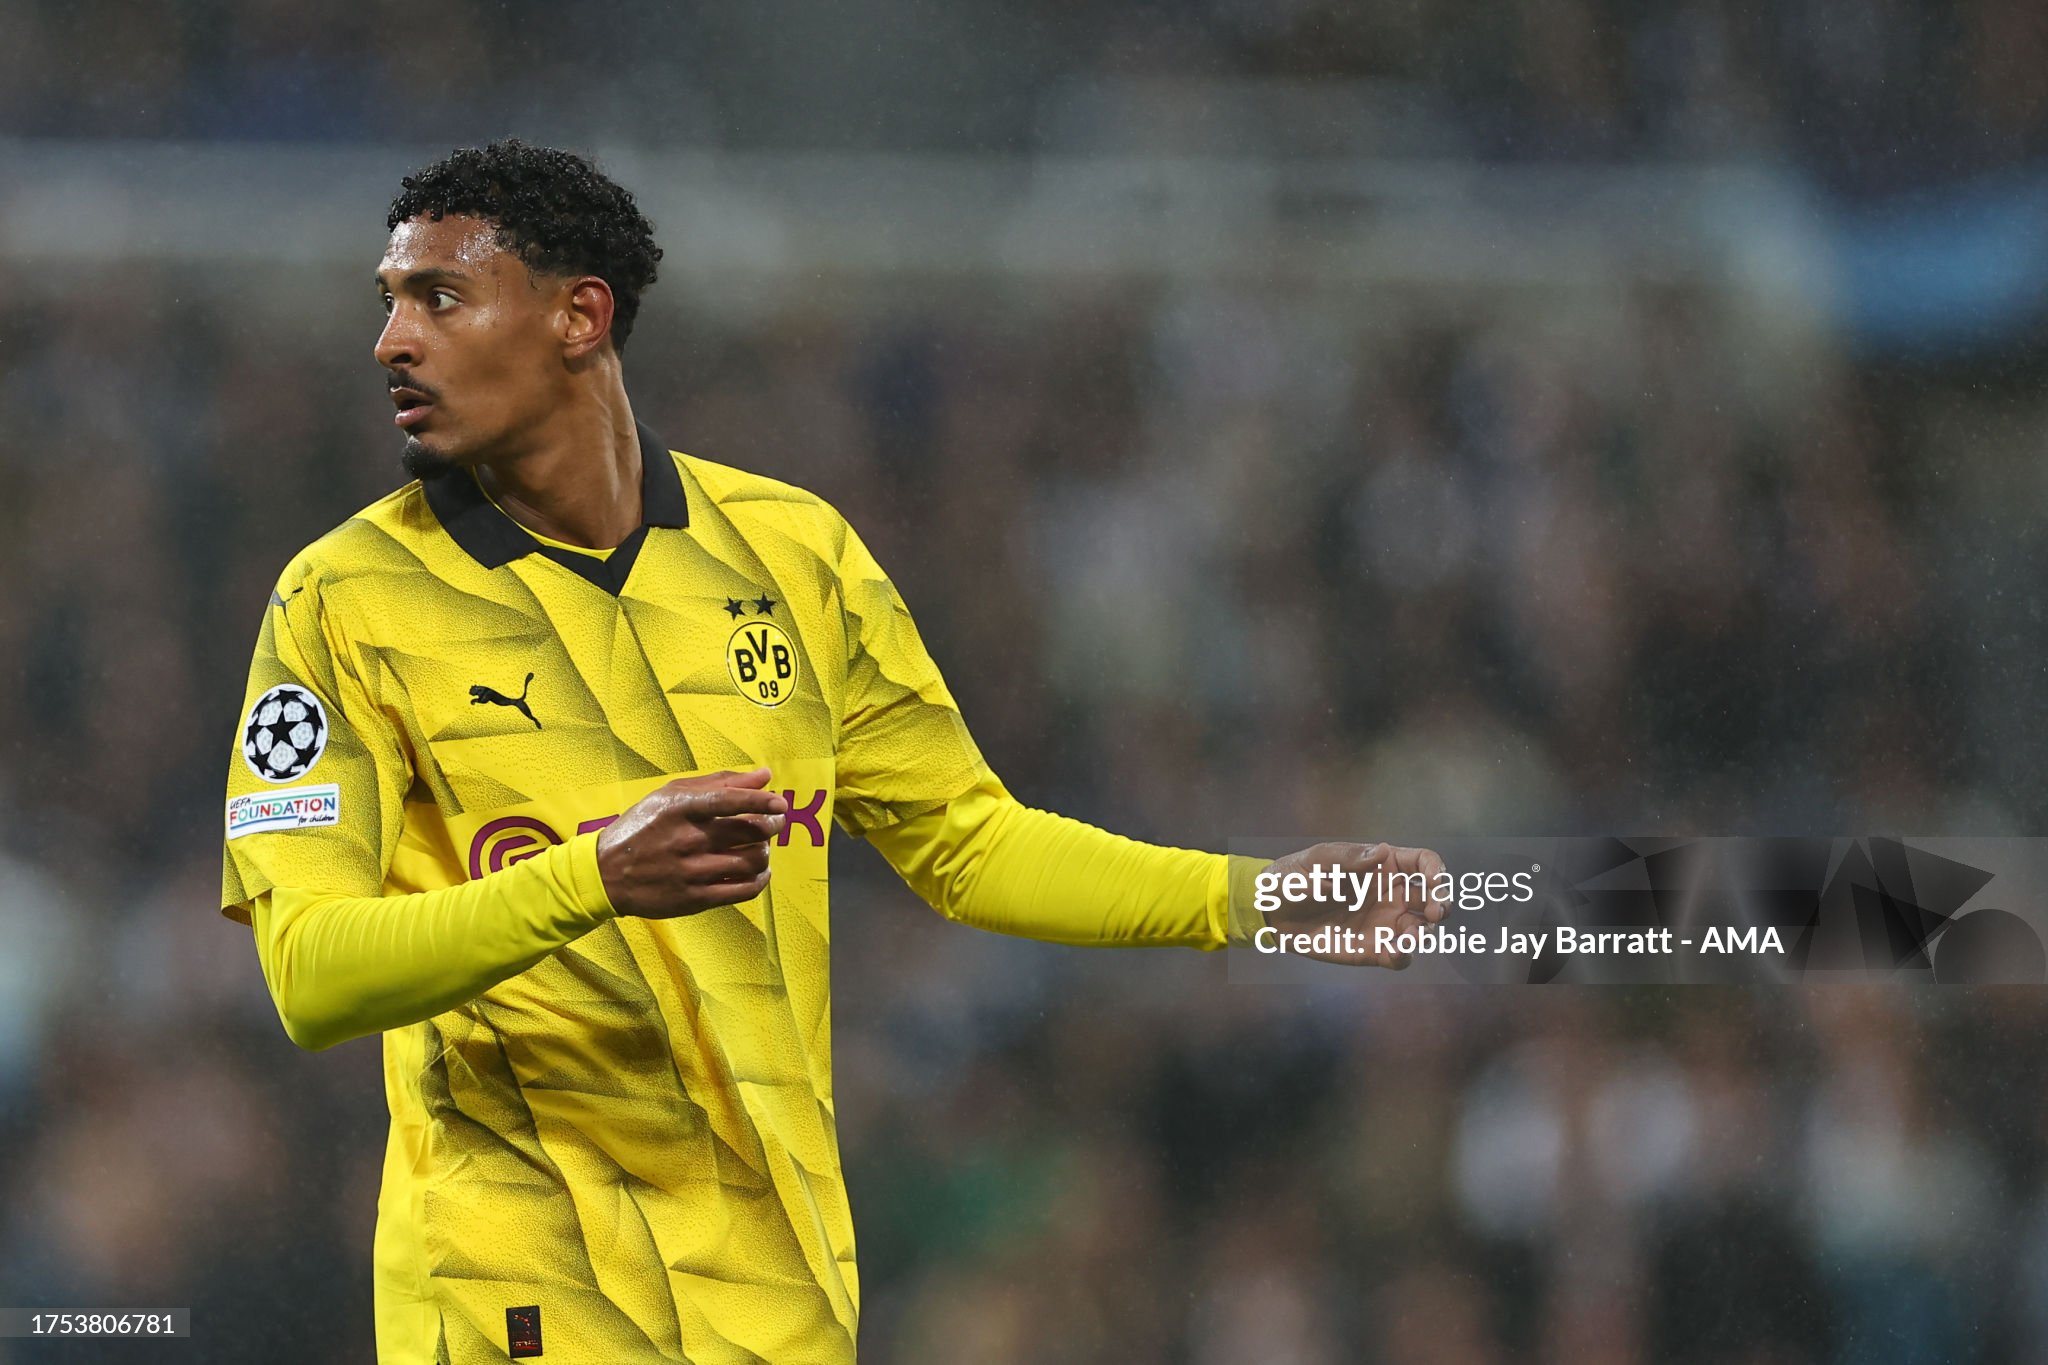 Haller thanks for the opportunity to return to the Premier League